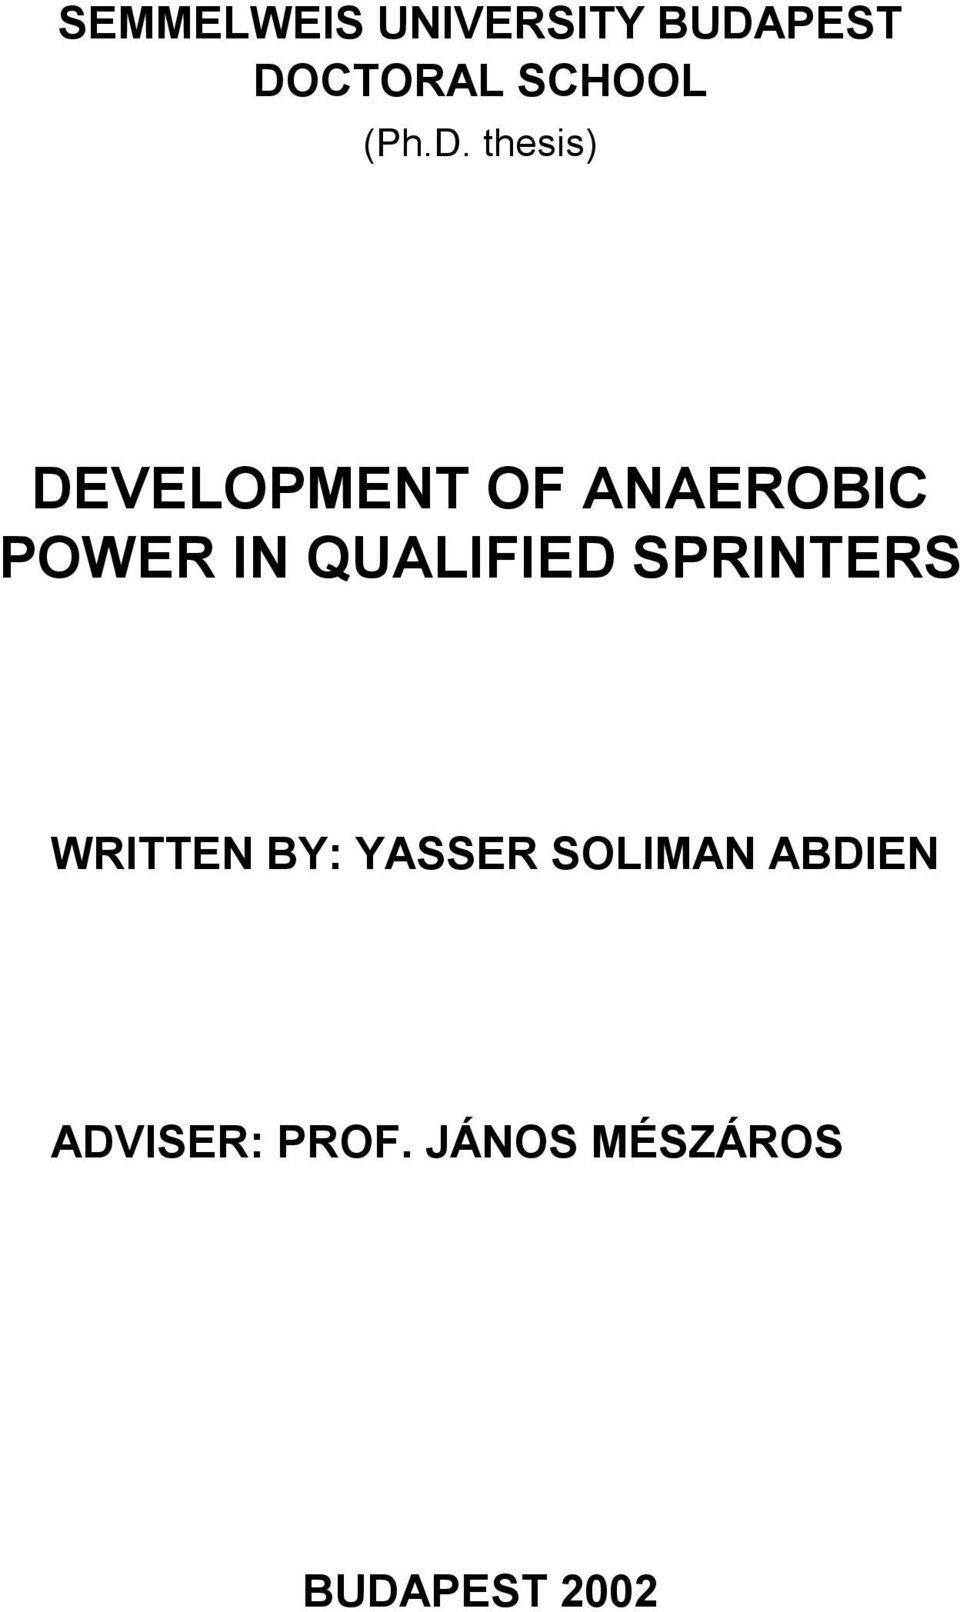 thesis) DEVELOPMENT OF ANAEROBIC POWER IN